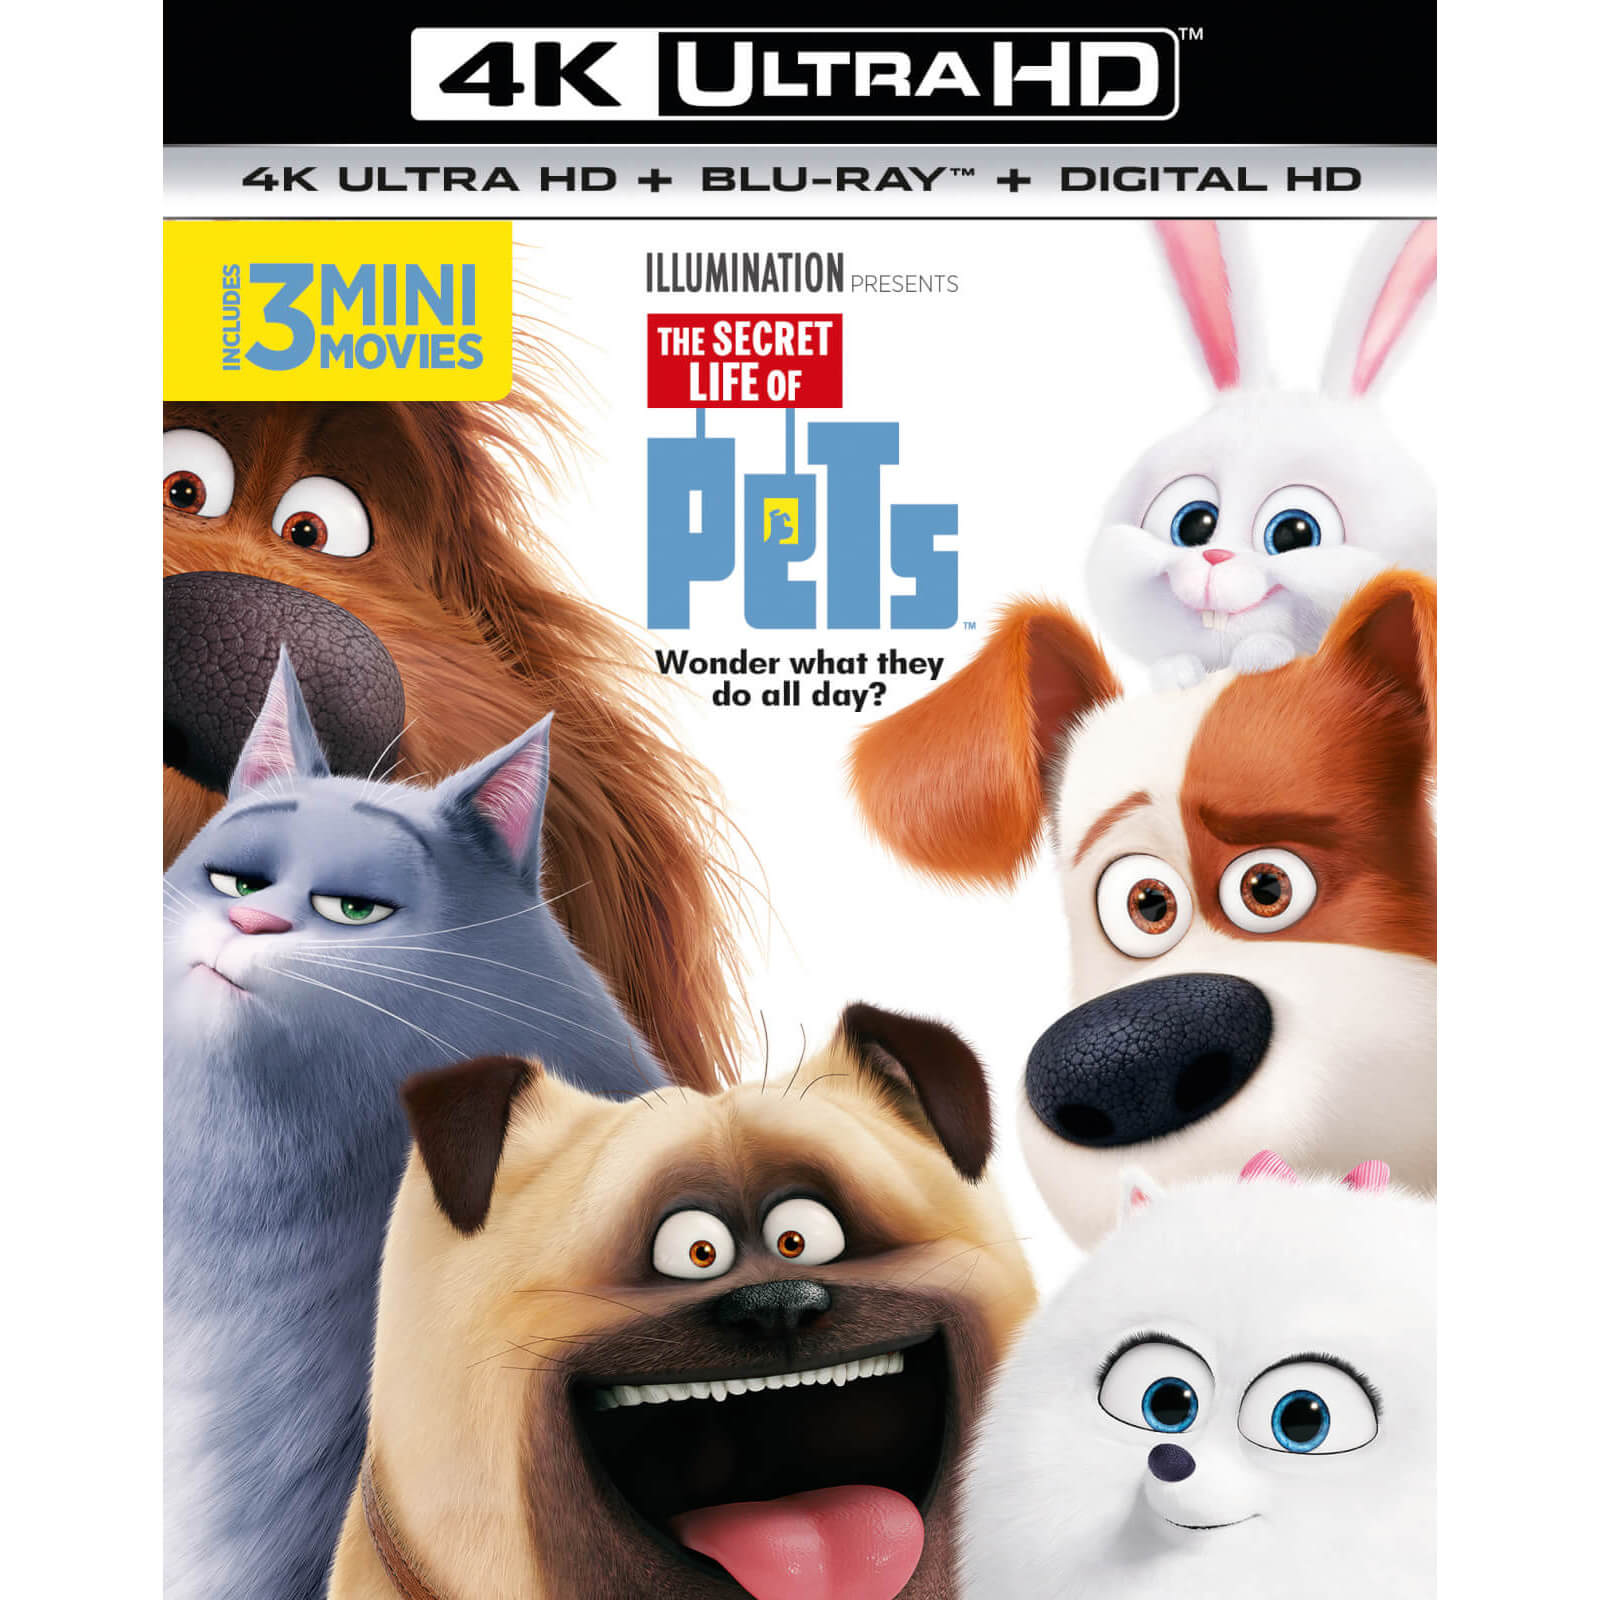 Universal Pictures The secret life of pets - 4k ultra hd